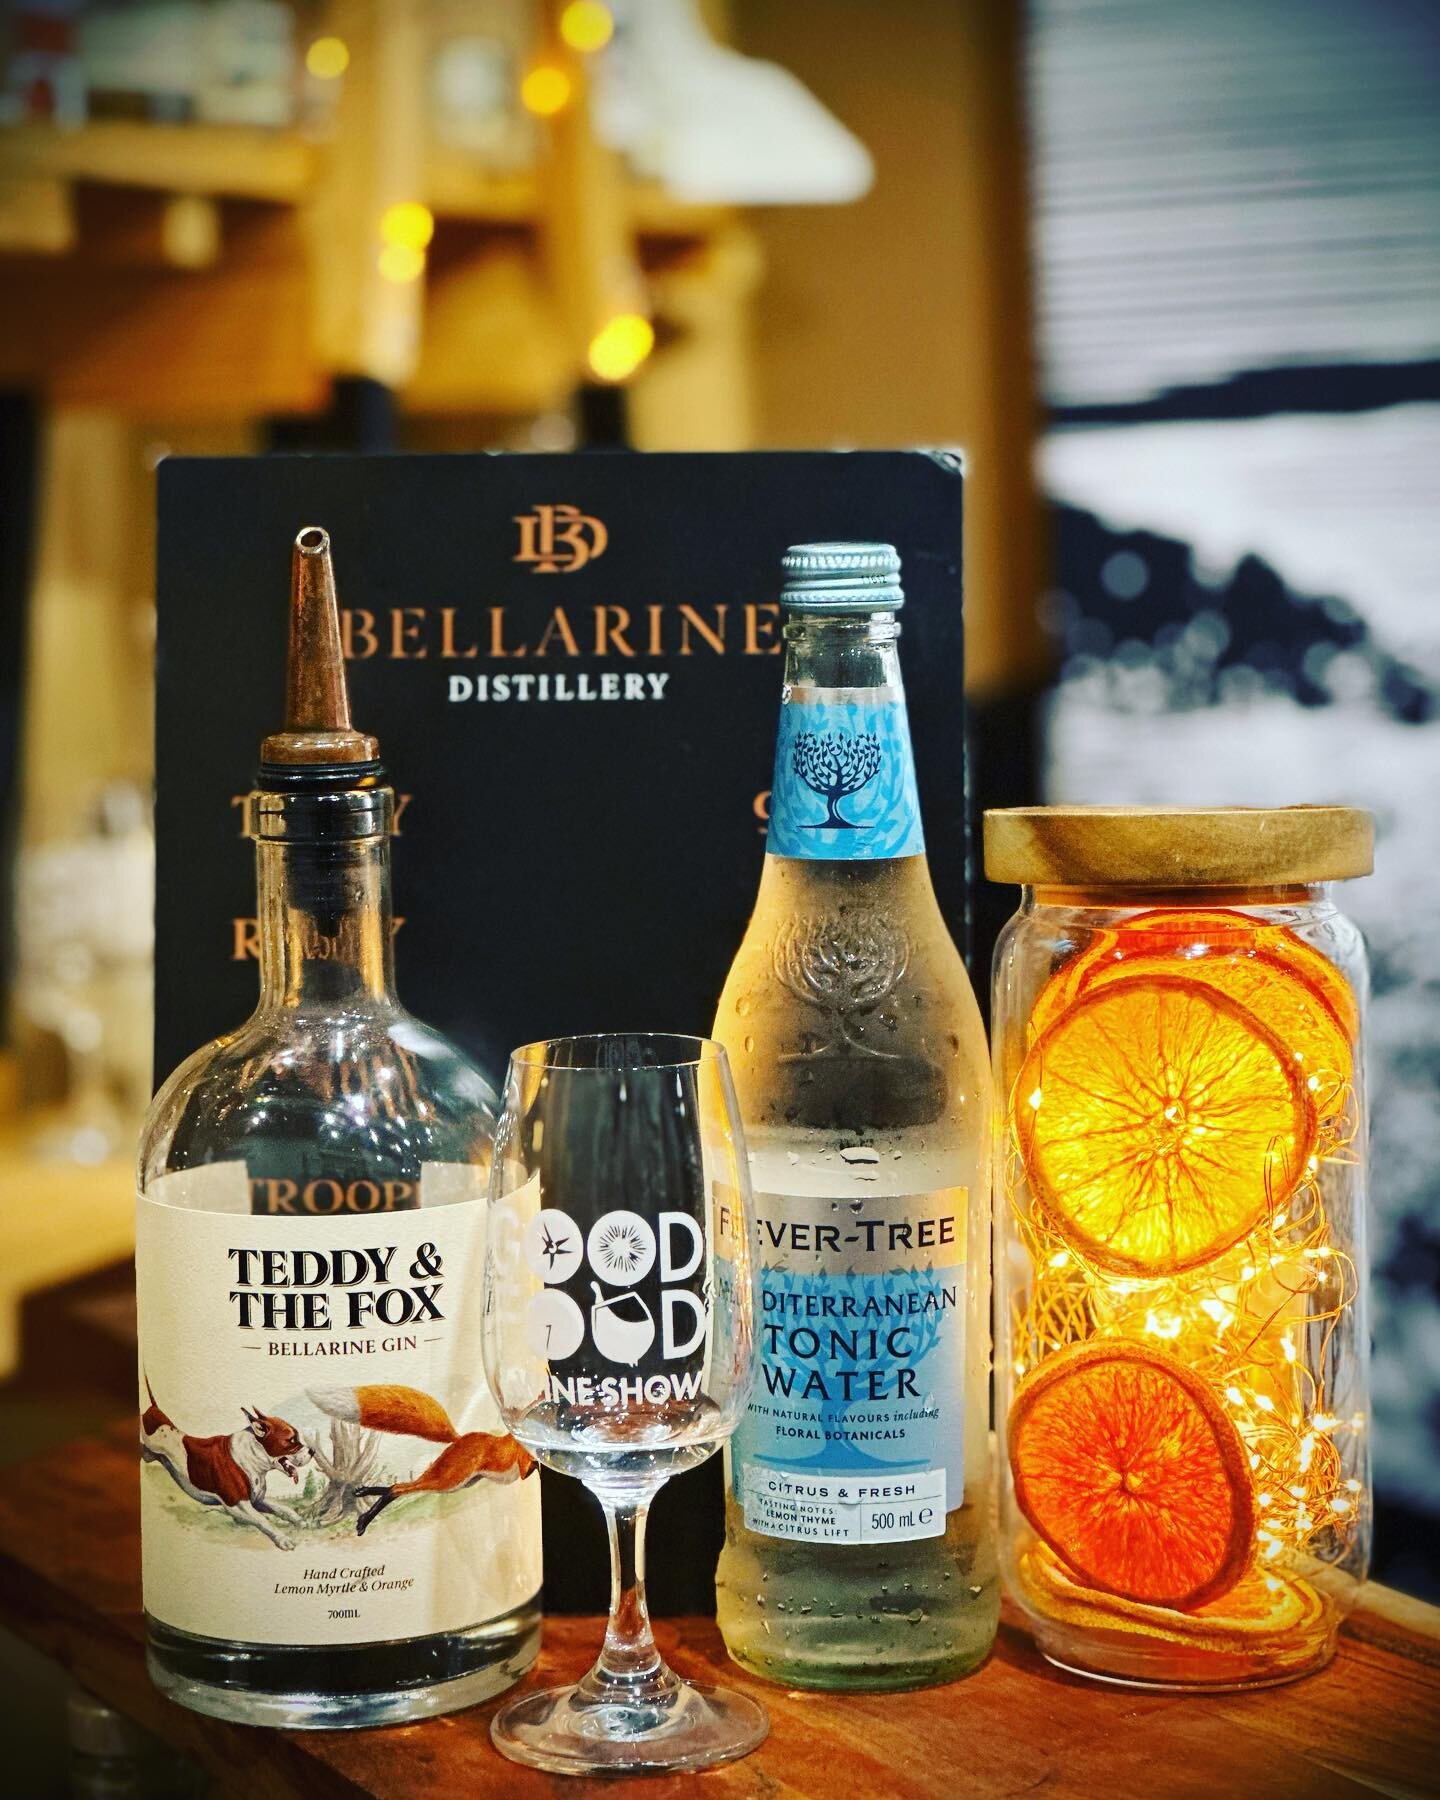 Perfect pairings on offer at the @goodfoodwine show this weekend @mcec Bought to you buy @fevertreeaustralia @bellarinedistillery #fevertreetonic #teddyandthefox #gin #distillery #goodfoodandwine #mixwiththebest #fevertreeaustralia #perfectpairing